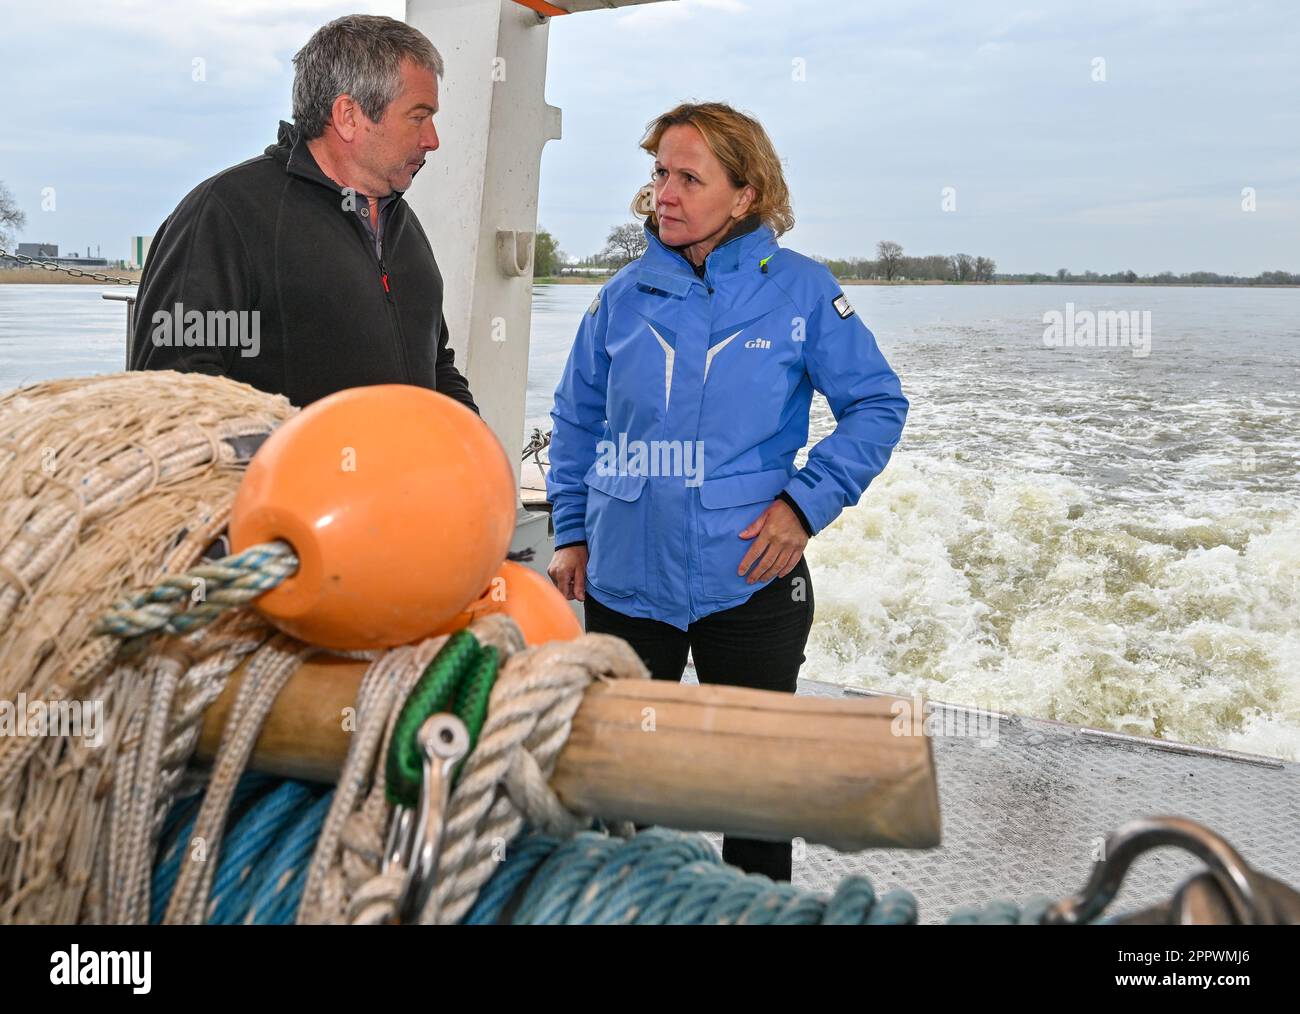 25 April 2023, Brandenburg, Küstrin-Kietz: Steffi Lemke (r, Bündnis 90/Die Grünen), Federal Minister for the Environment, is on board a research vessel on the German-Polish border river Oder talking to Christian Wolter from the Leibniz Institute of Freshwater Ecology and Inland Fisheries (IGB). During a scientific trawl survey, the Federal Environment Minister learned about the current situation following the environmental disaster in 2022. The massive fish kill in the Oder River in the summer of 2022 continues to be the subject of current research. The Leibniz Institute of Freshwater Ecology Stock Photo